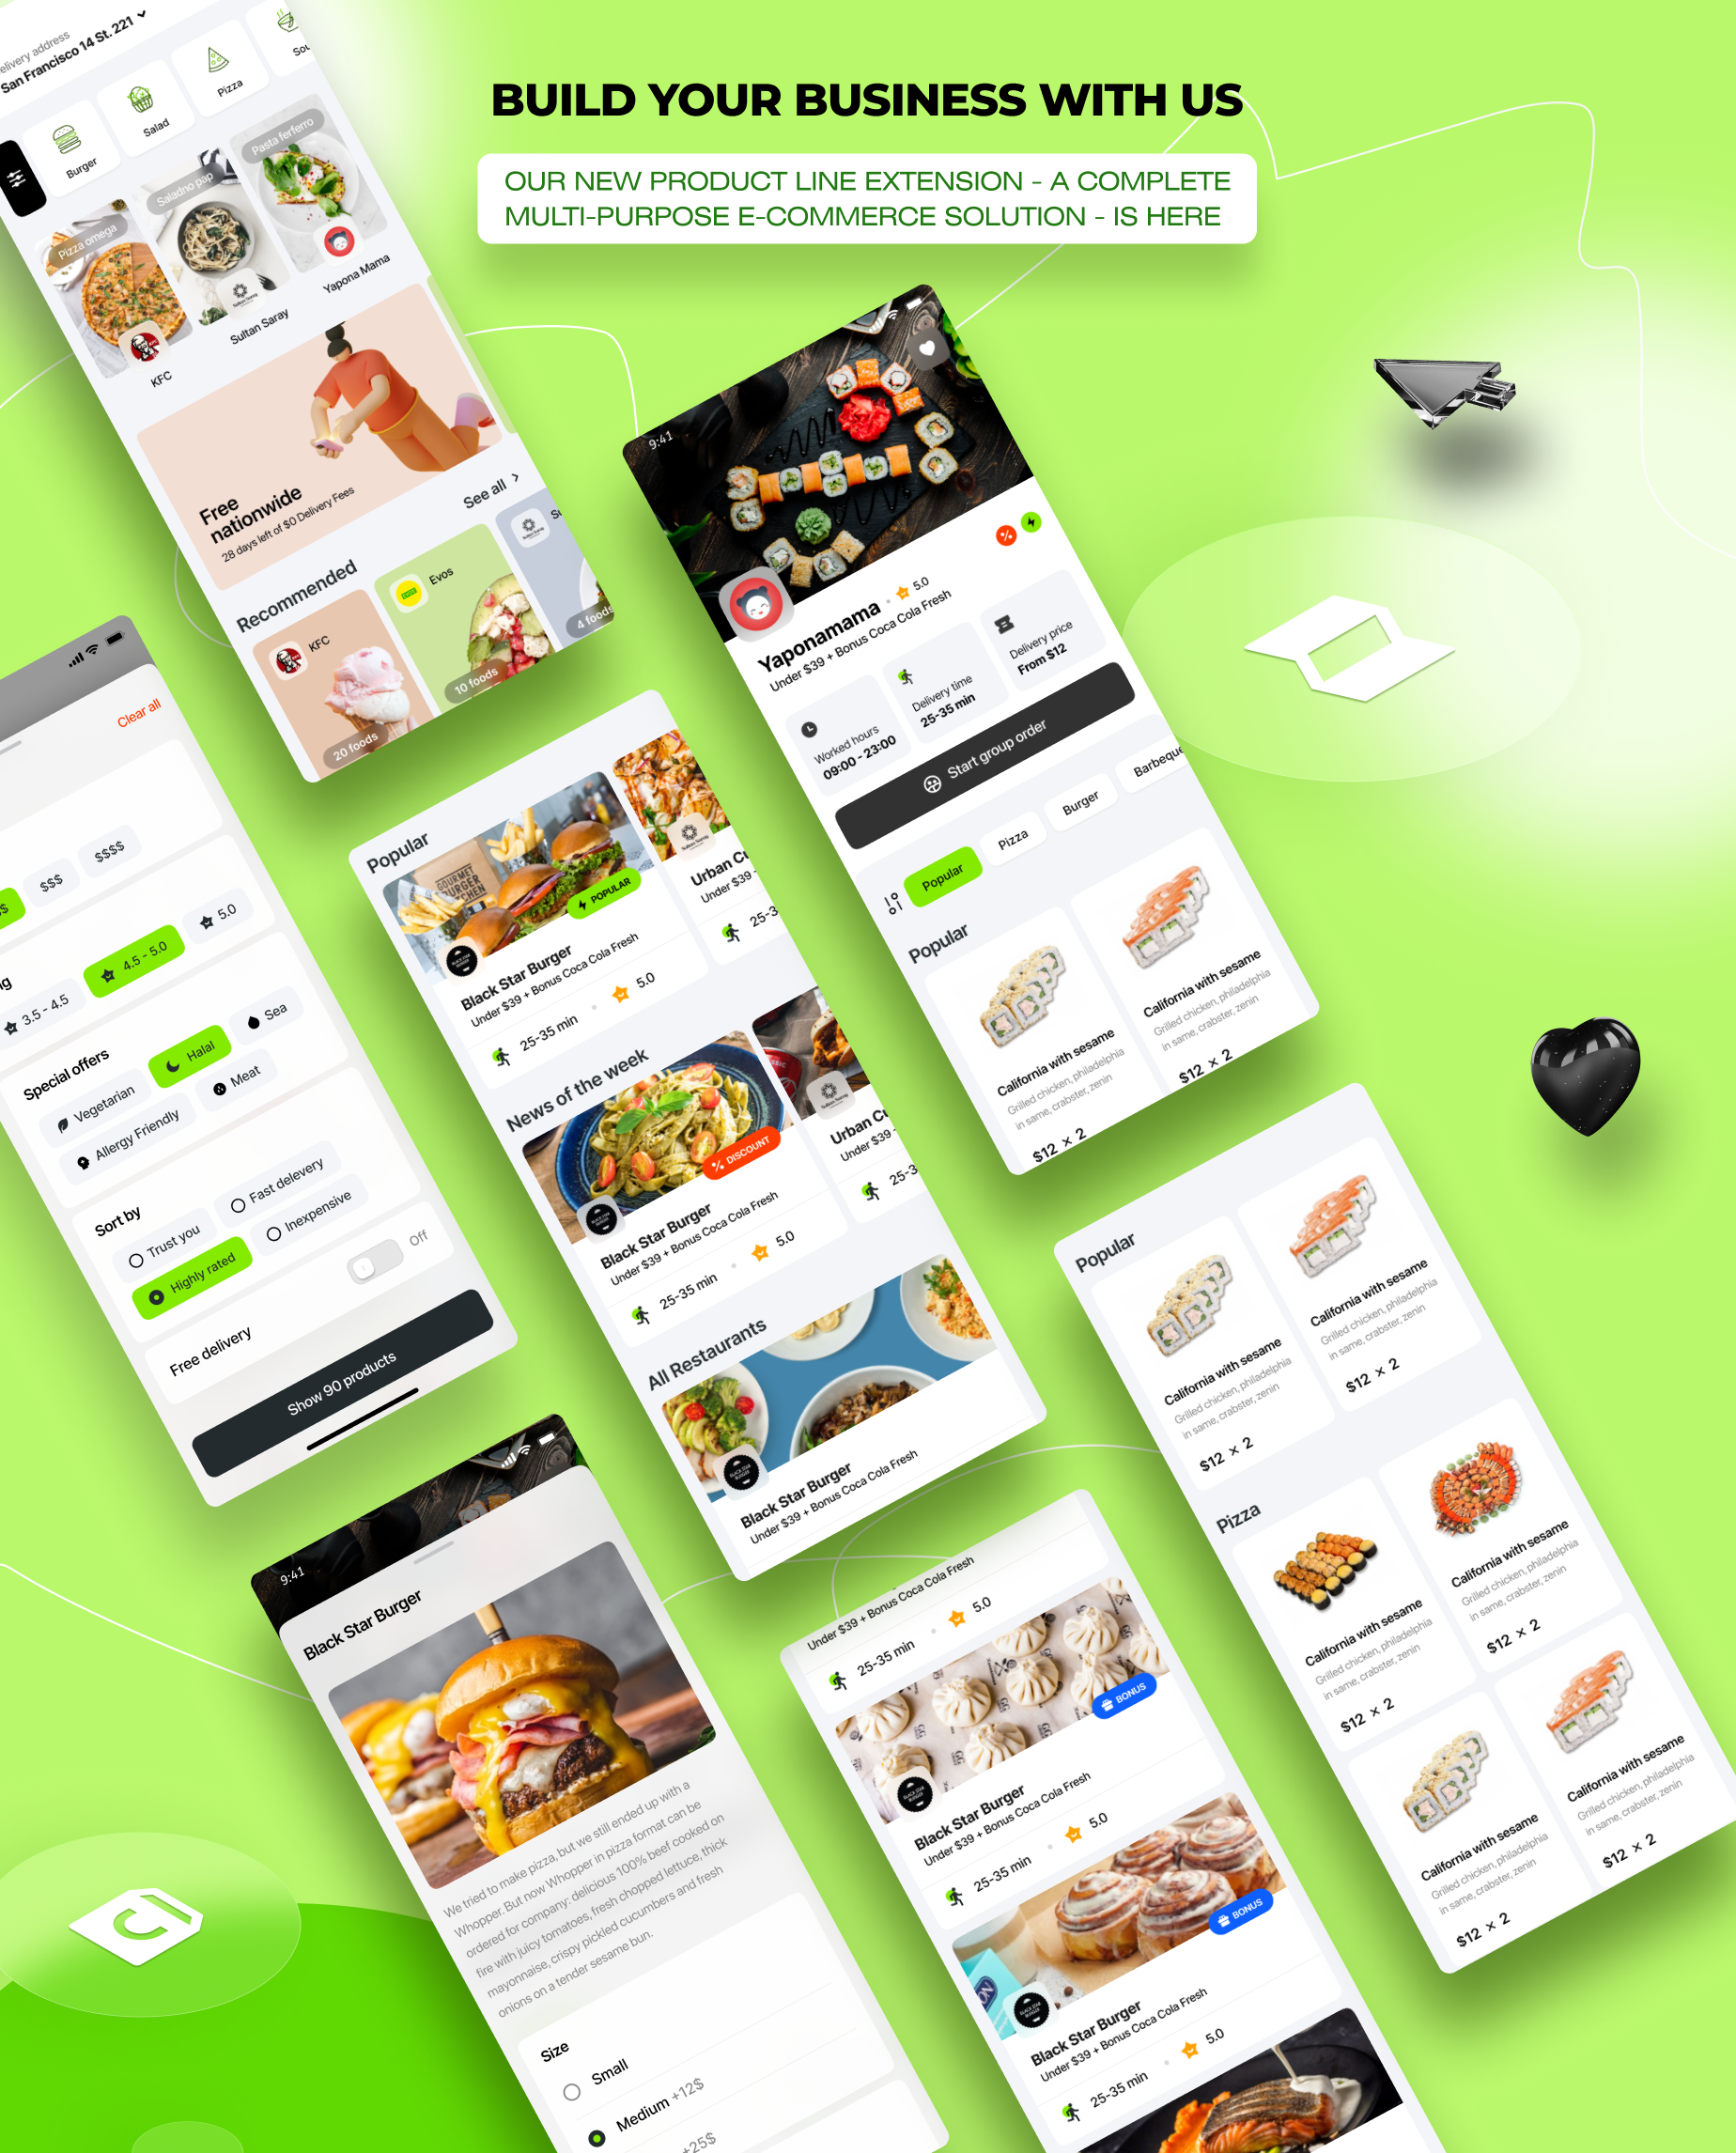 Foodyman - Multi-Restaurant Food and Grocery Ordering and Delivery Marketplace (Web & Customer Apps) - 10